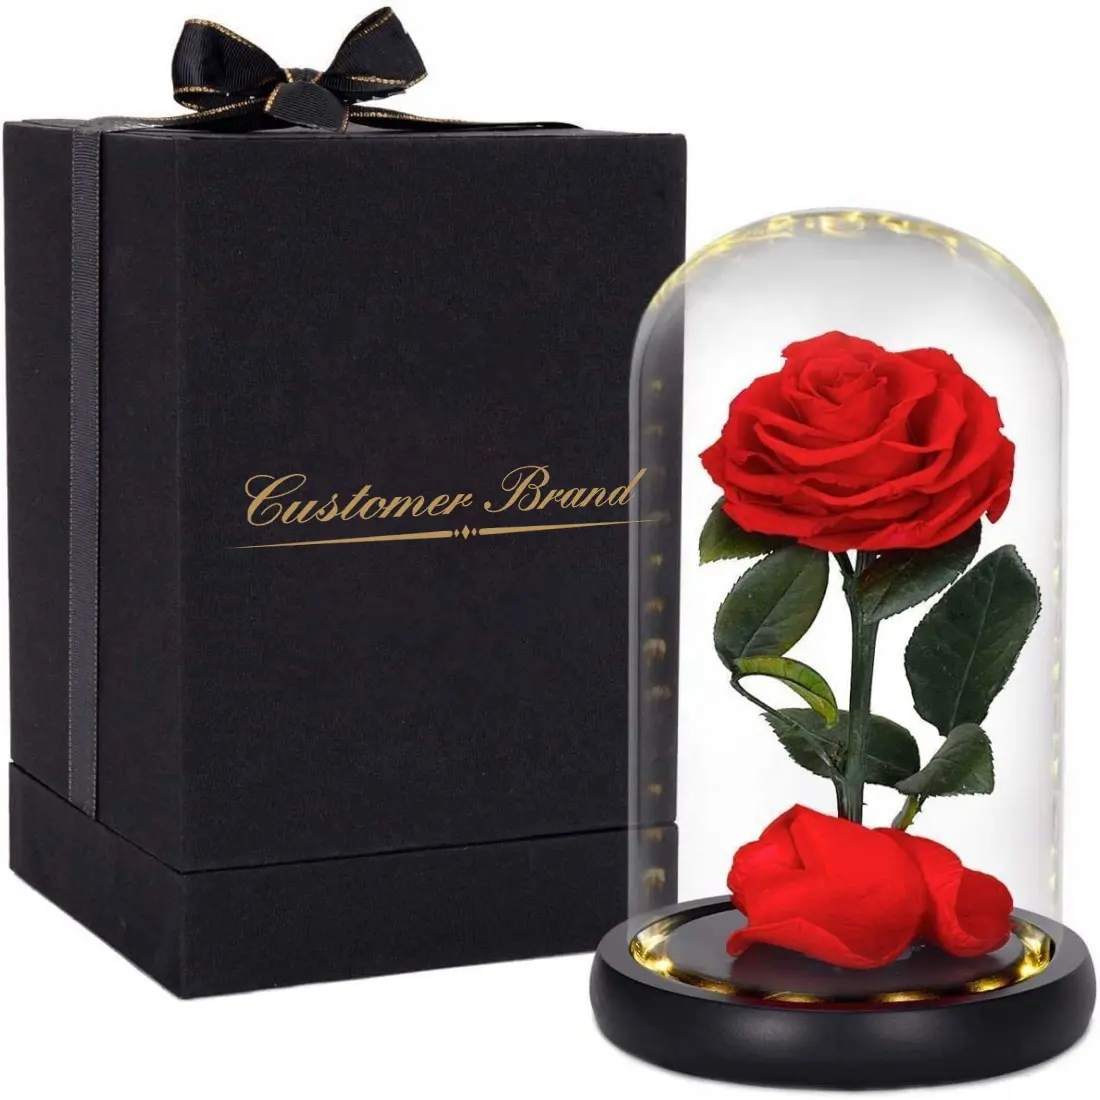 China Wholesale Rosas Eternas Preservadas Valrntine's Gif By Forever Flower Preserved Roses In Glass Dome For Mother Day